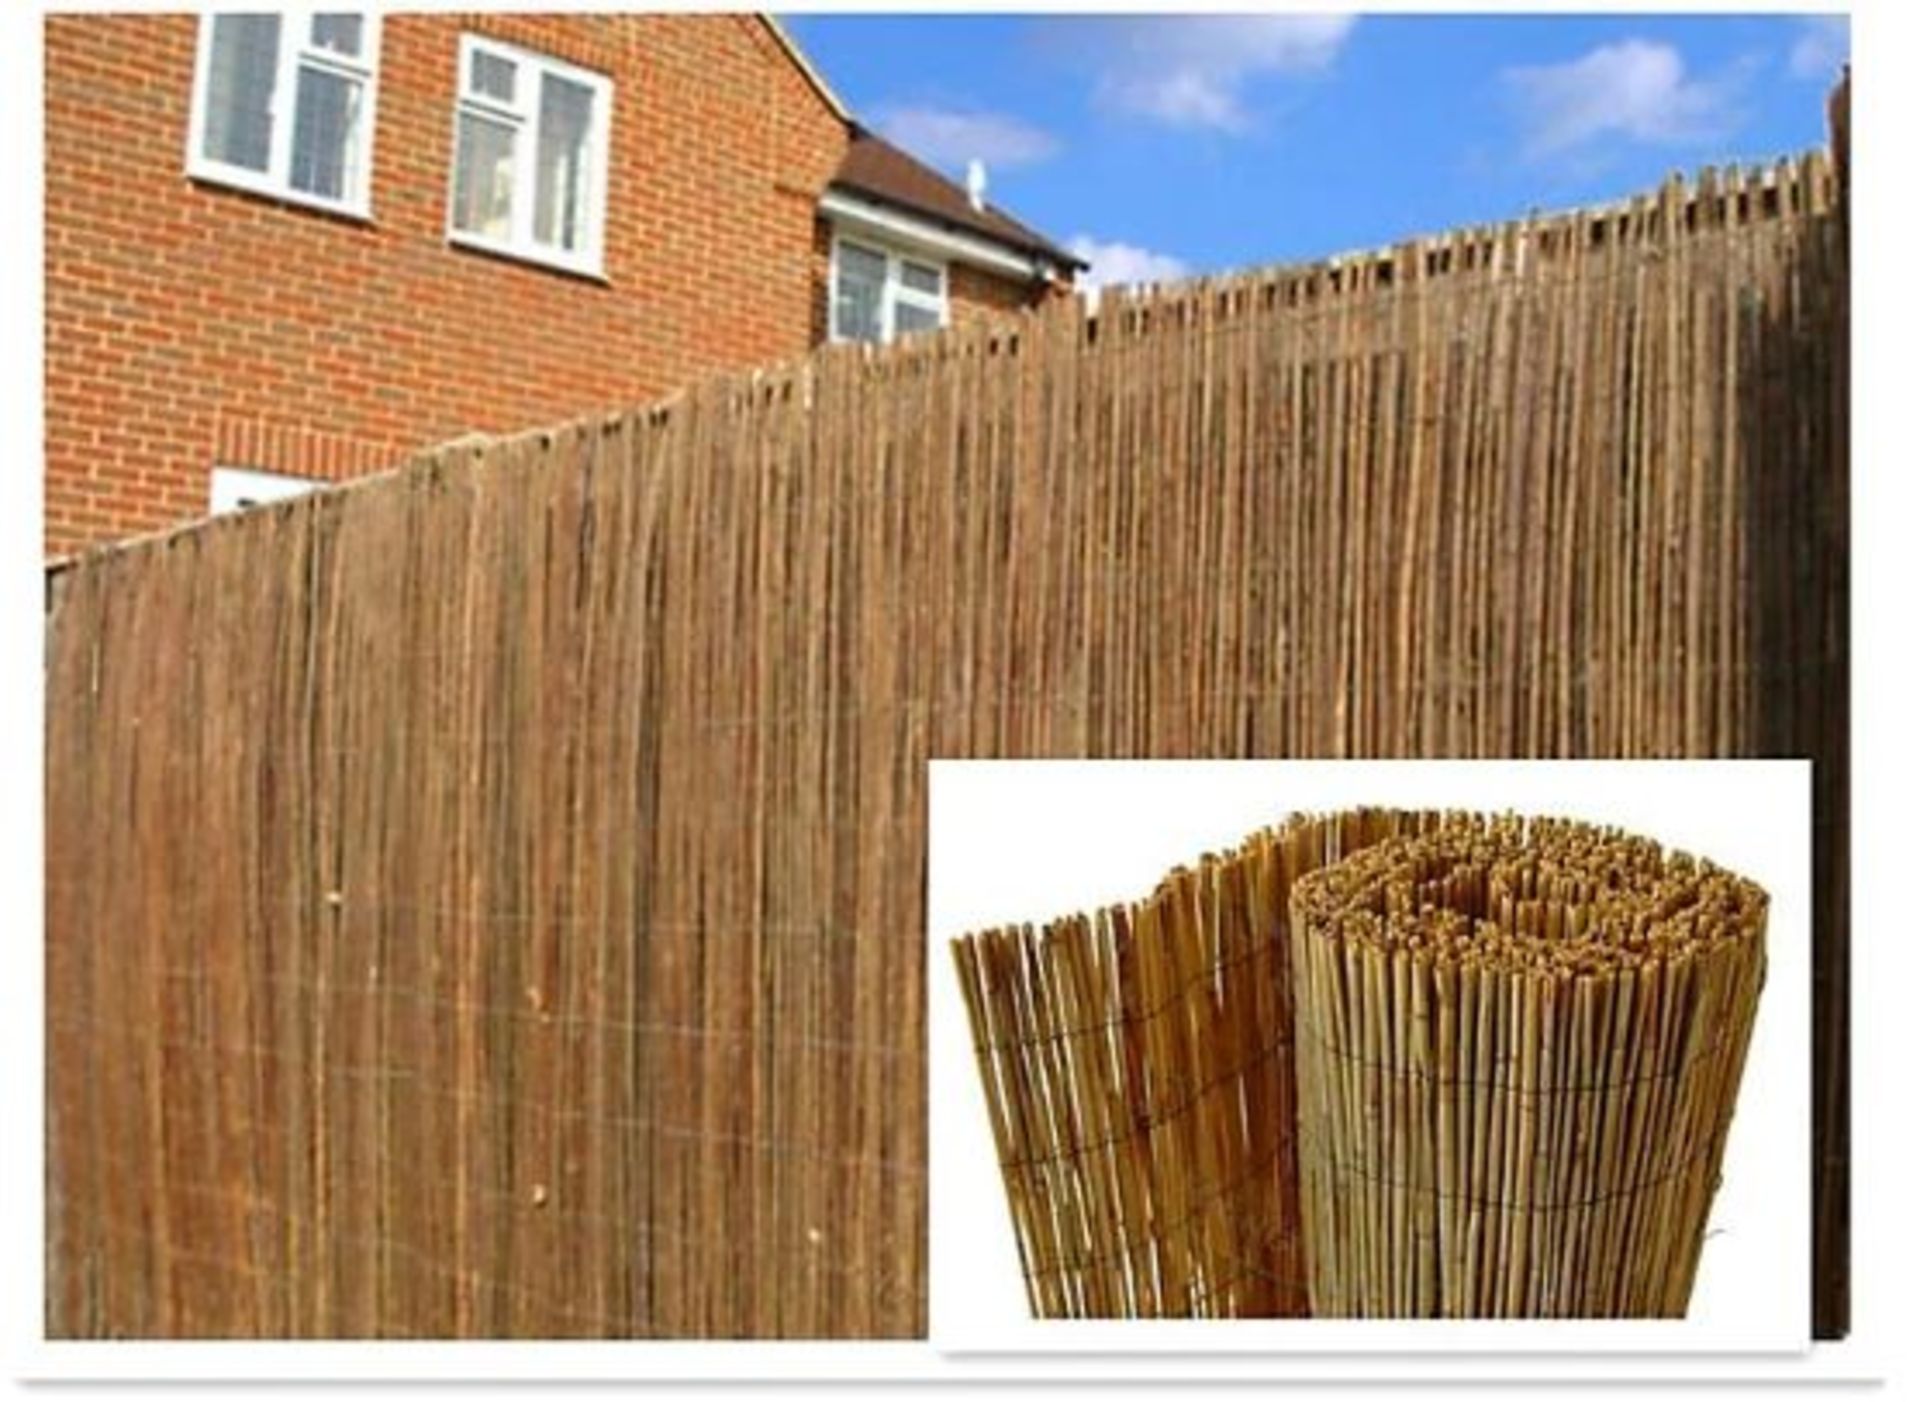 Natural Peeled Reed Screening Roll Garden Screen Fence Fencing Panel H 1.5m x W 4m. - R14.15.